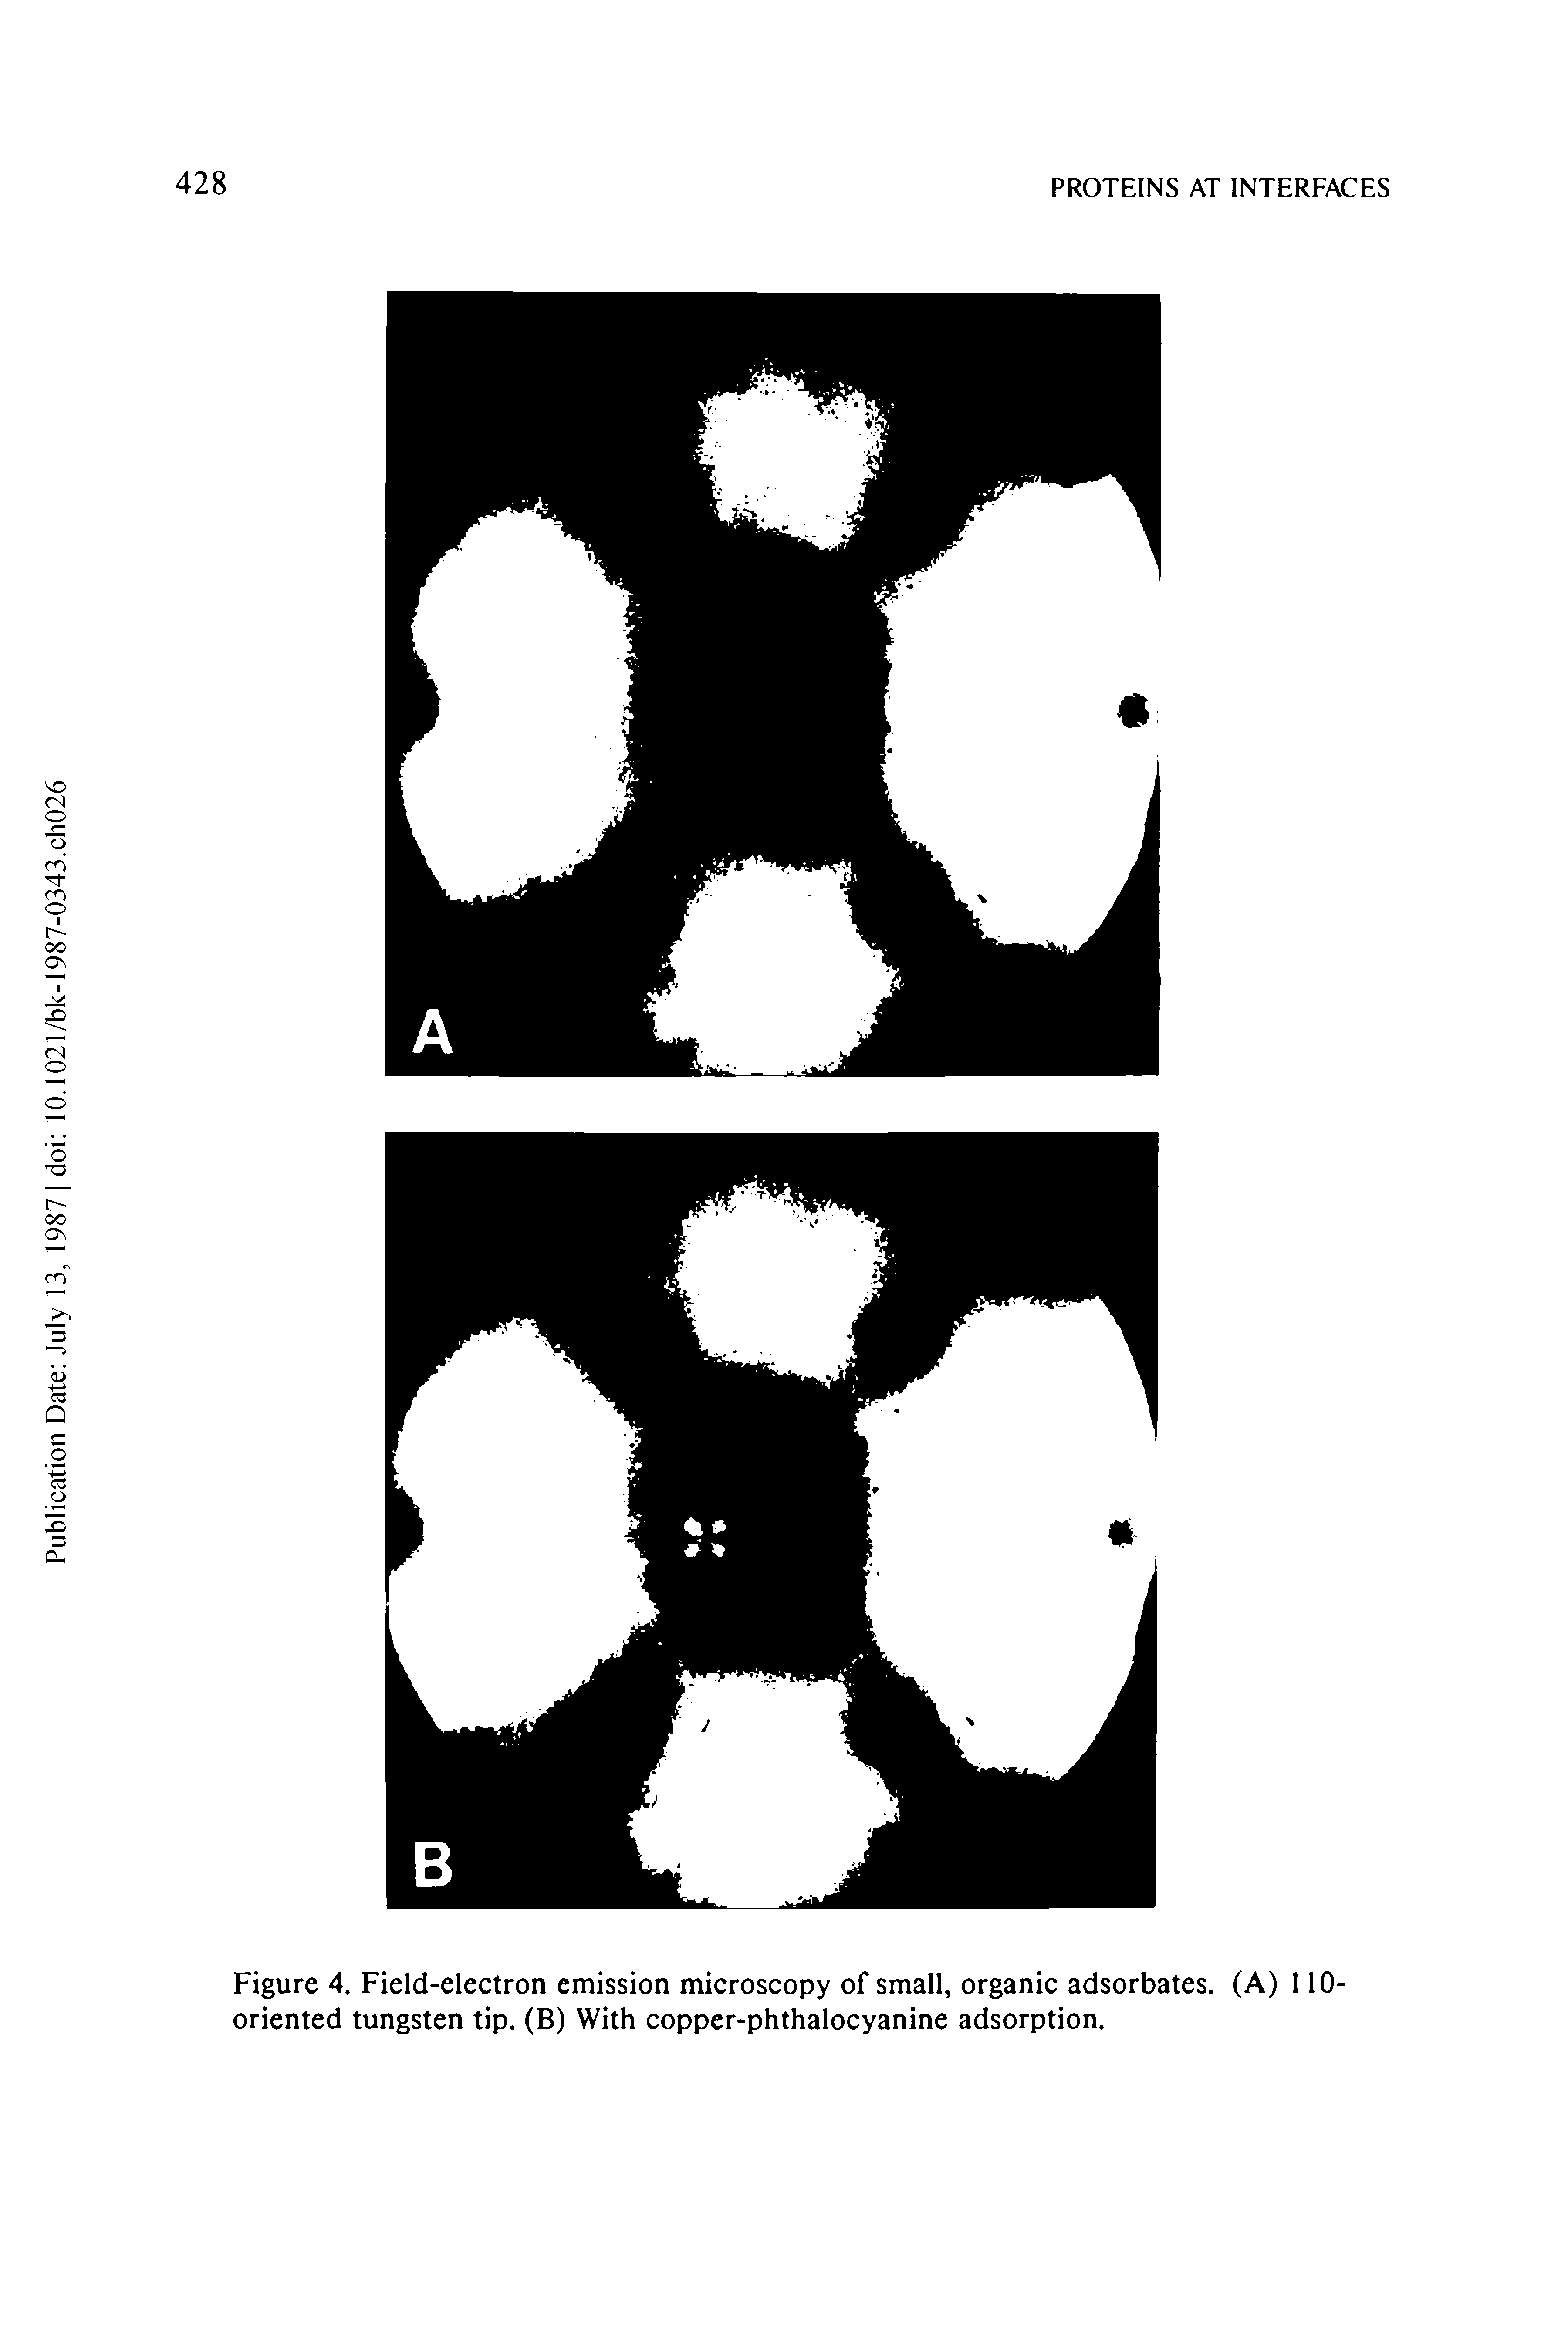 Figure 4. Field-electron emission microscopy of small, organic adsorbates. (A) 110-oriented tungsten tip. (B) With copper-phthalocyanine adsorption.